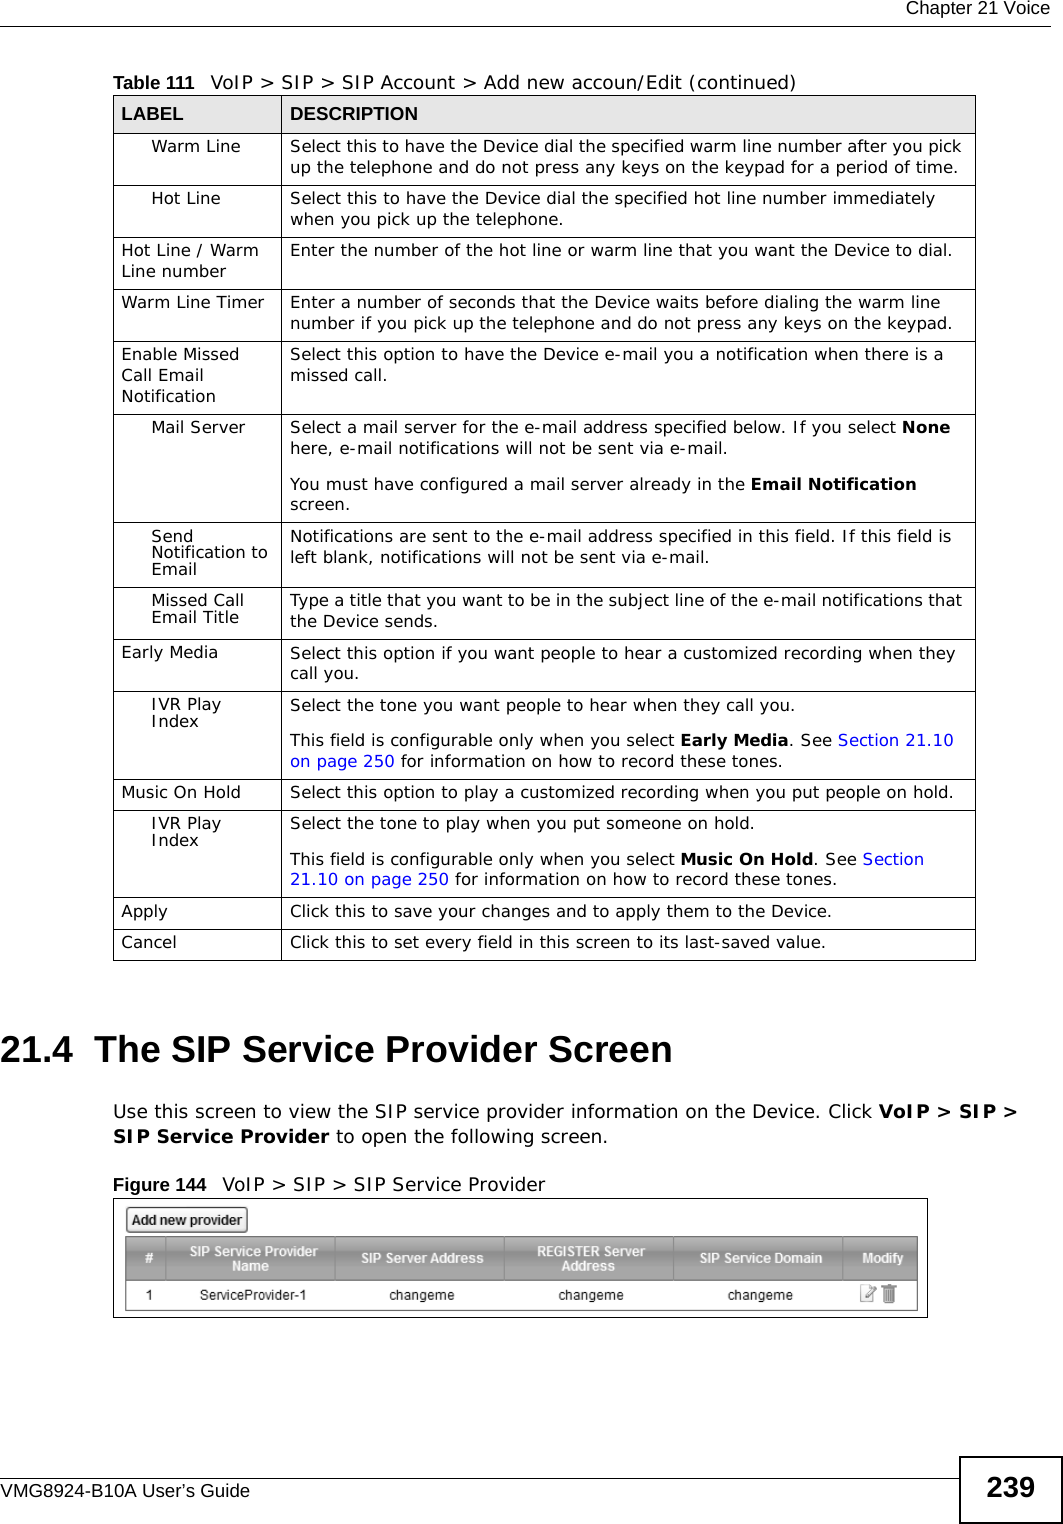  Chapter 21 VoiceVMG8924-B10A User’s Guide 23921.4  The SIP Service Provider Screen Use this screen to view the SIP service provider information on the Device. Click VoIP &gt; SIP &gt; SIP Service Provider to open the following screen. Figure 144   VoIP &gt; SIP &gt; SIP Service ProviderWarm Line Select this to have the Device dial the specified warm line number after you pick up the telephone and do not press any keys on the keypad for a period of time.Hot Line Select this to have the Device dial the specified hot line number immediately when you pick up the telephone.Hot Line / Warm Line number Enter the number of the hot line or warm line that you want the Device to dial.Warm Line Timer  Enter a number of seconds that the Device waits before dialing the warm line number if you pick up the telephone and do not press any keys on the keypad.Enable Missed Call Email NotificationSelect this option to have the Device e-mail you a notification when there is a missed call.Mail Server Select a mail server for the e-mail address specified below. If you select None here, e-mail notifications will not be sent via e-mail.You must have configured a mail server already in the Email Notification screen.Send Notification to EmailNotifications are sent to the e-mail address specified in this field. If this field is left blank, notifications will not be sent via e-mail.Missed Call Email Title Type a title that you want to be in the subject line of the e-mail notifications that the Device sends.Early Media Select this option if you want people to hear a customized recording when they call you.IVR Play Index Select the tone you want people to hear when they call you.This field is configurable only when you select Early Media. See Section 21.10 on page 250 for information on how to record these tones.Music On Hold Select this option to play a customized recording when you put people on hold.IVR Play Index Select the tone to play when you put someone on hold.This field is configurable only when you select Music On Hold. See Section 21.10 on page 250 for information on how to record these tones.Apply Click this to save your changes and to apply them to the Device.Cancel Click this to set every field in this screen to its last-saved value.Table 111   VoIP &gt; SIP &gt; SIP Account &gt; Add new accoun/Edit (continued)LABEL DESCRIPTION